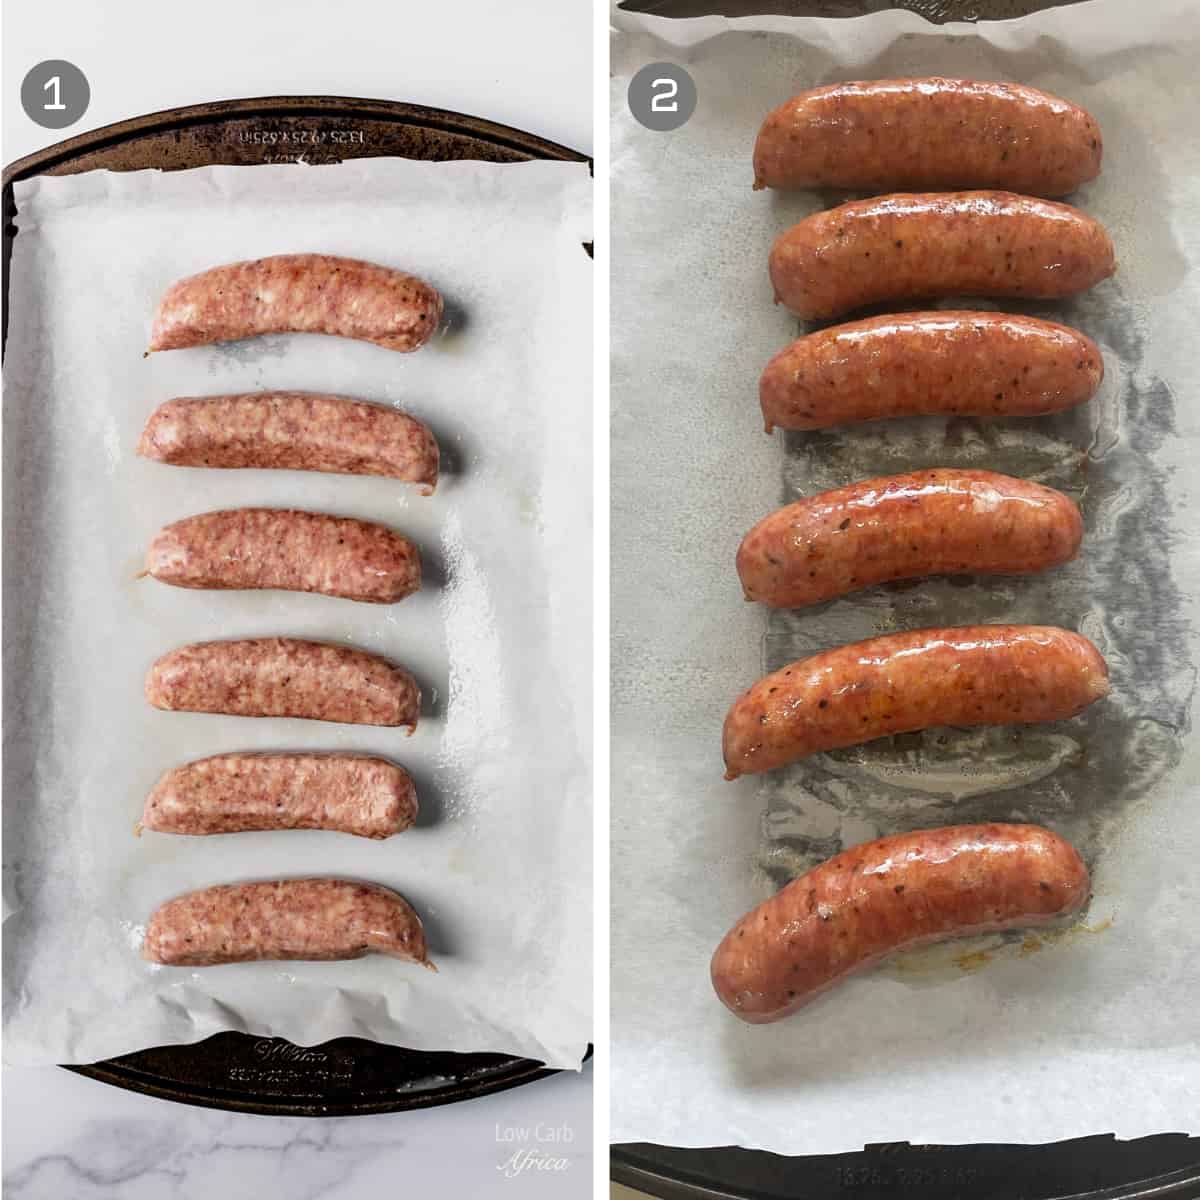 sausages on a baking sheet in the oven